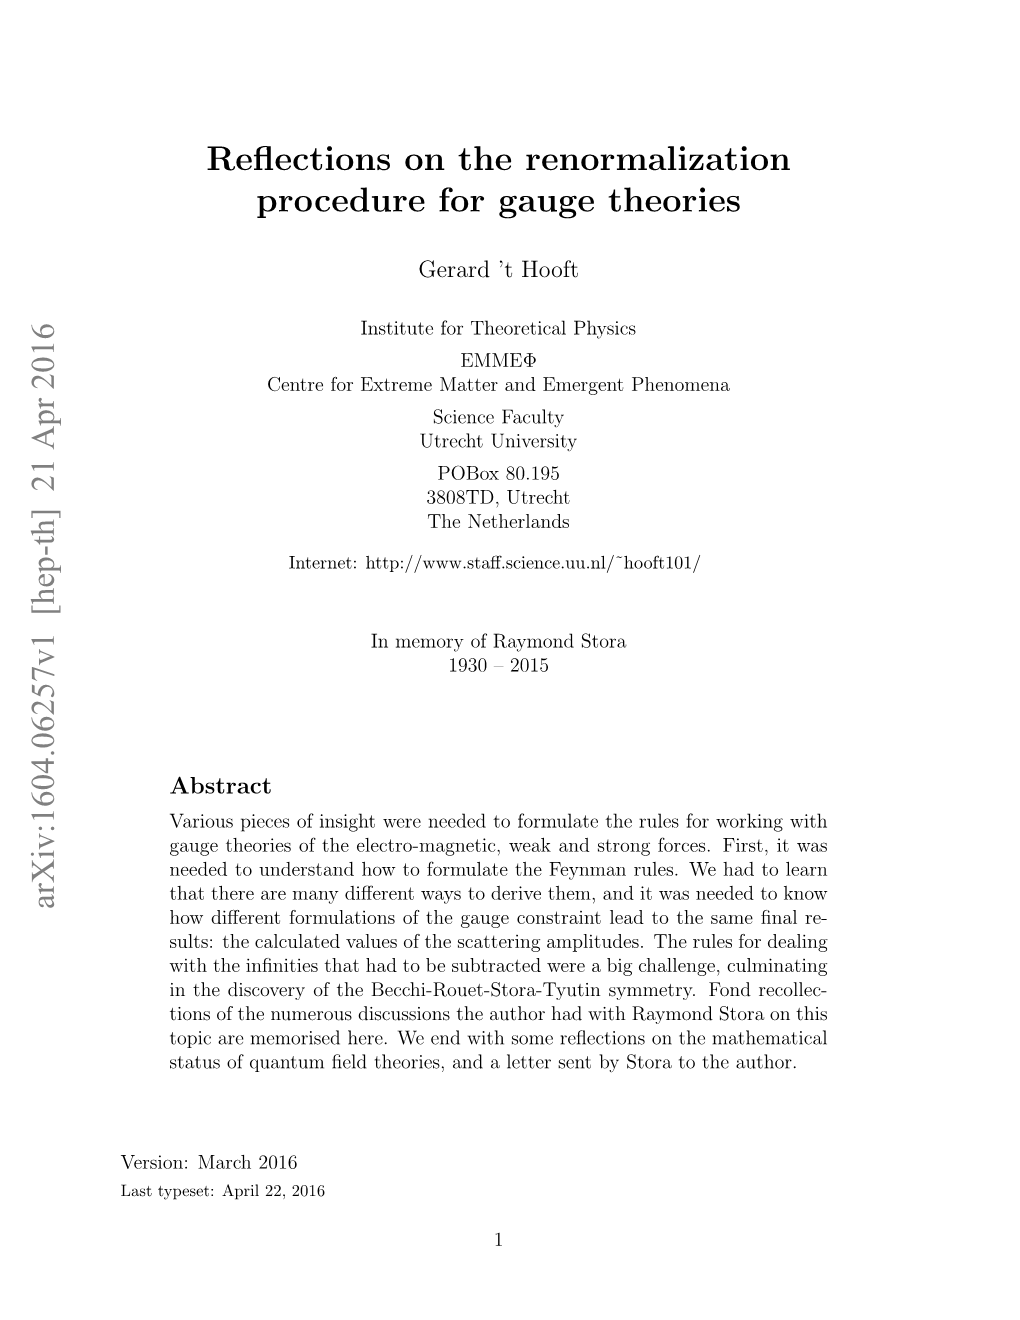 Reflections on the Renormalization Procedure for Gauge Theories